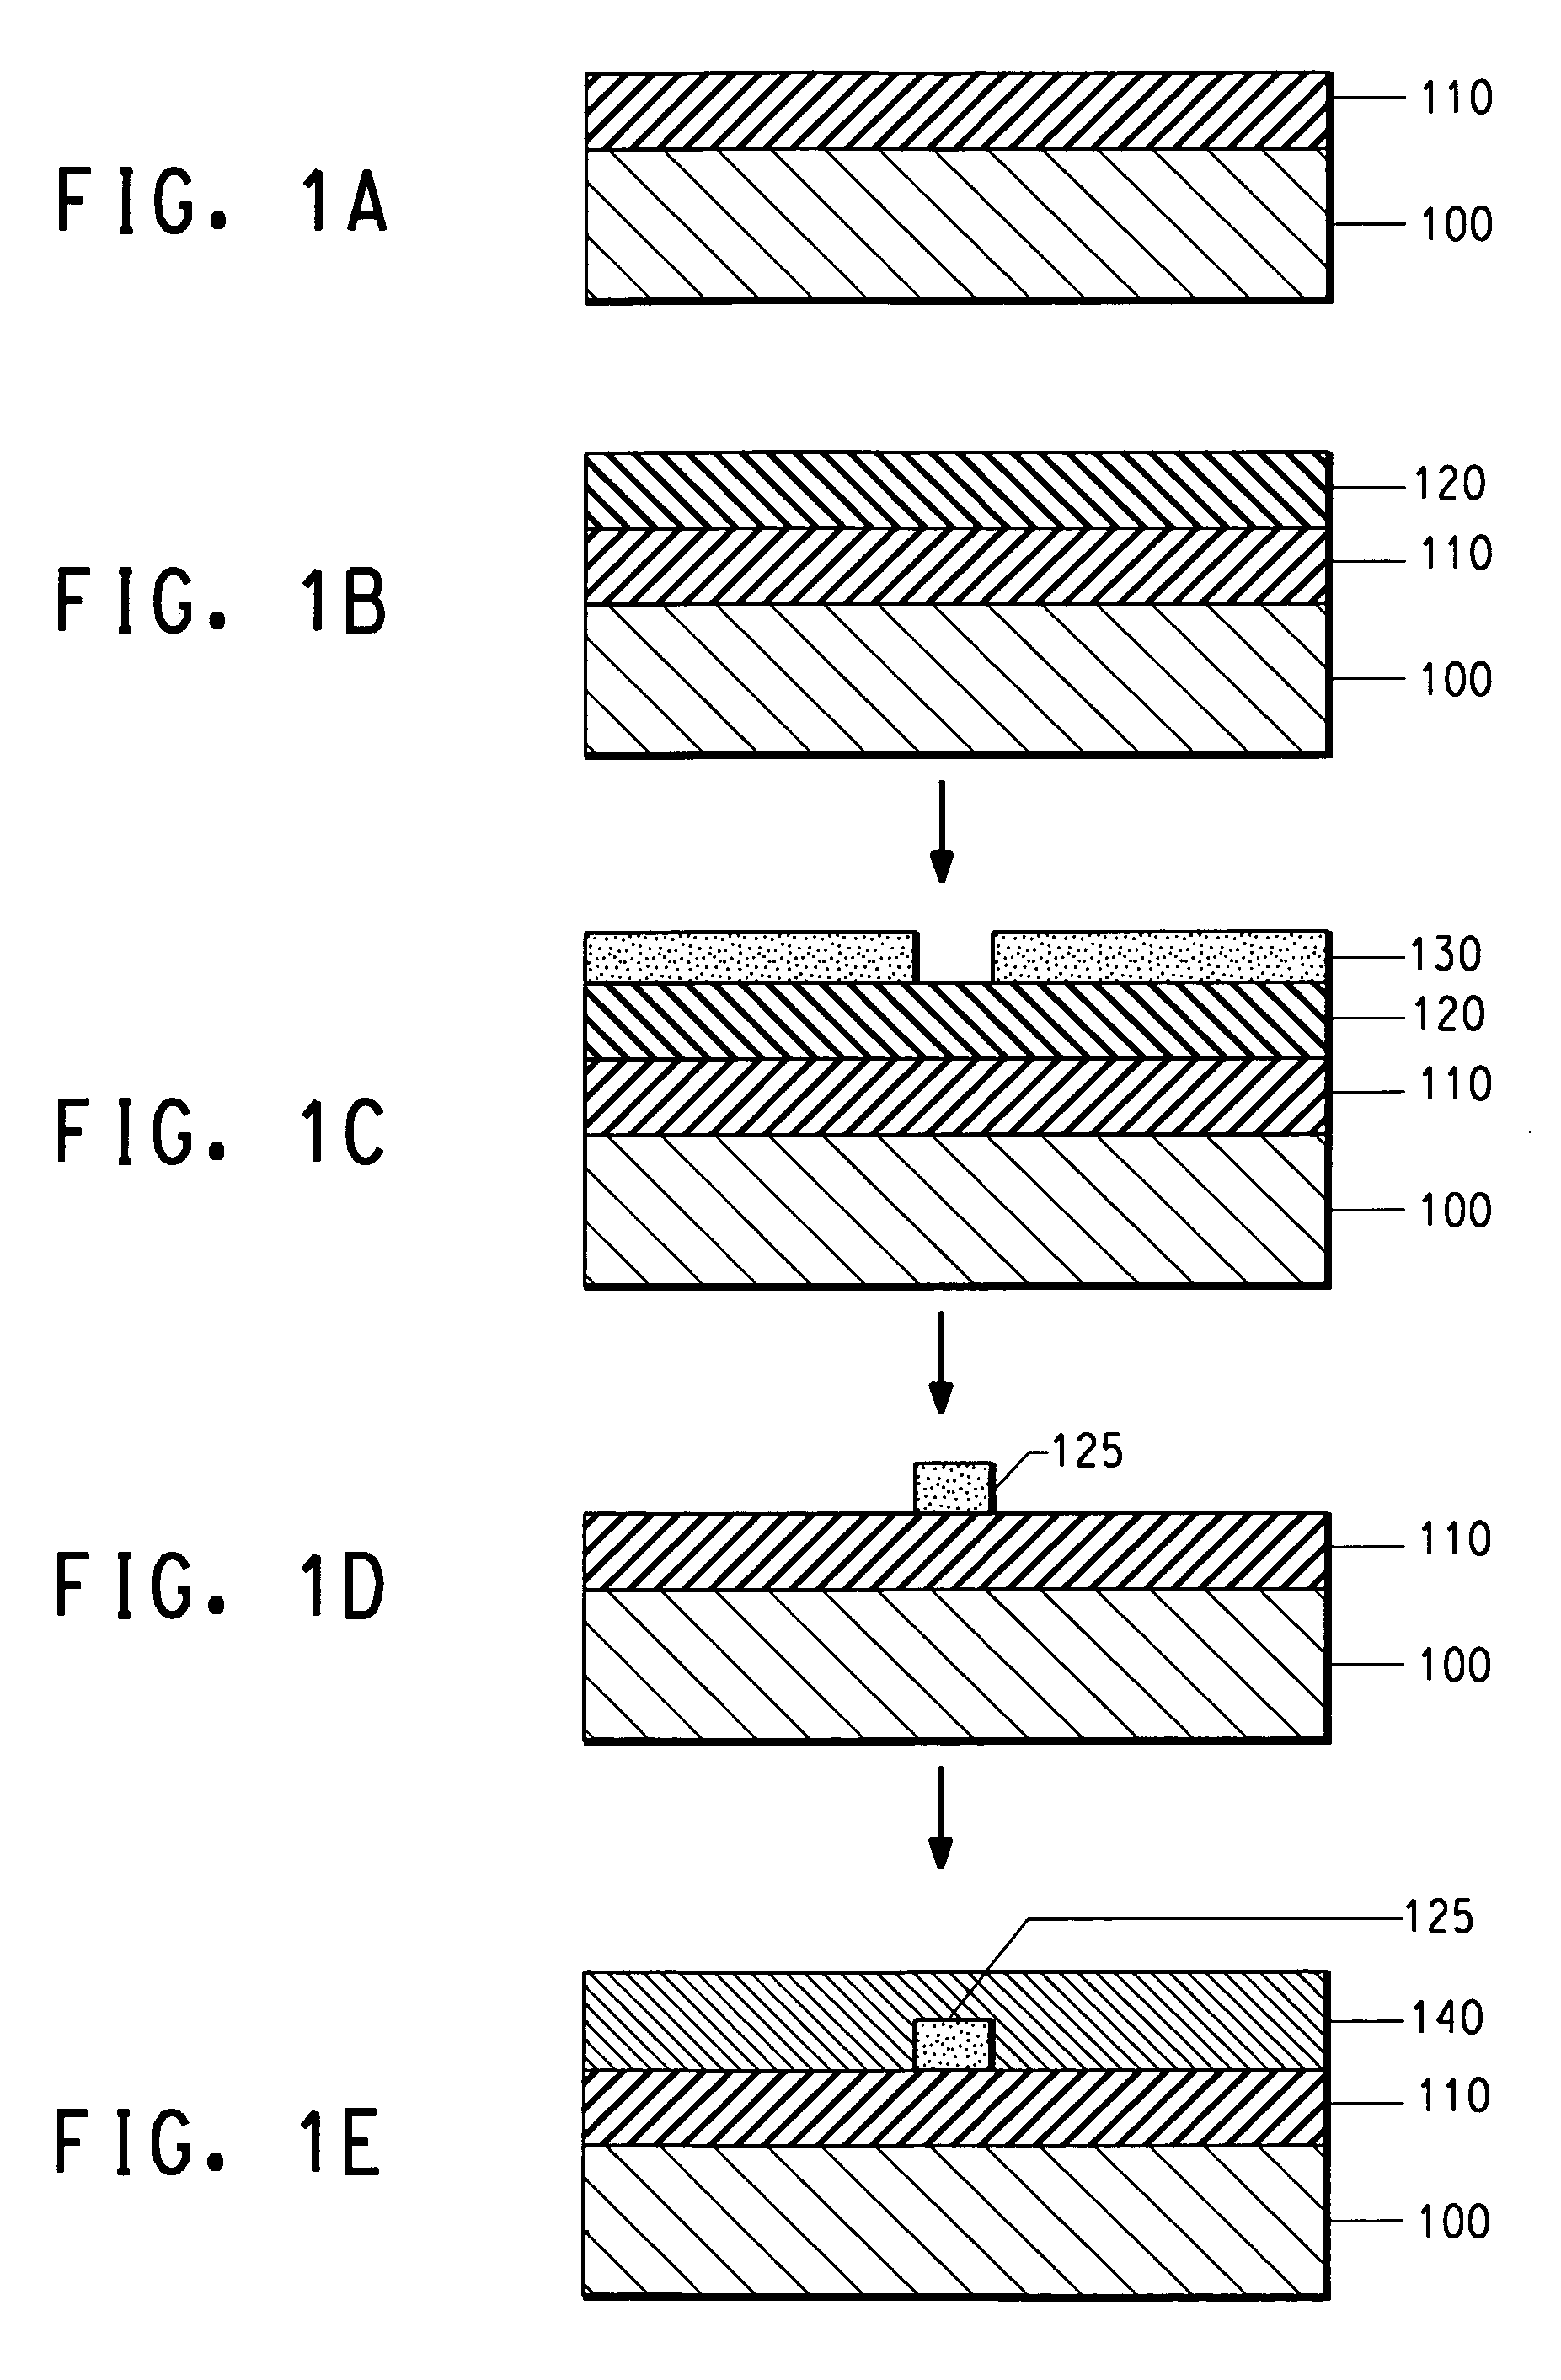 Photosensitive acrylate composition and waveguide device